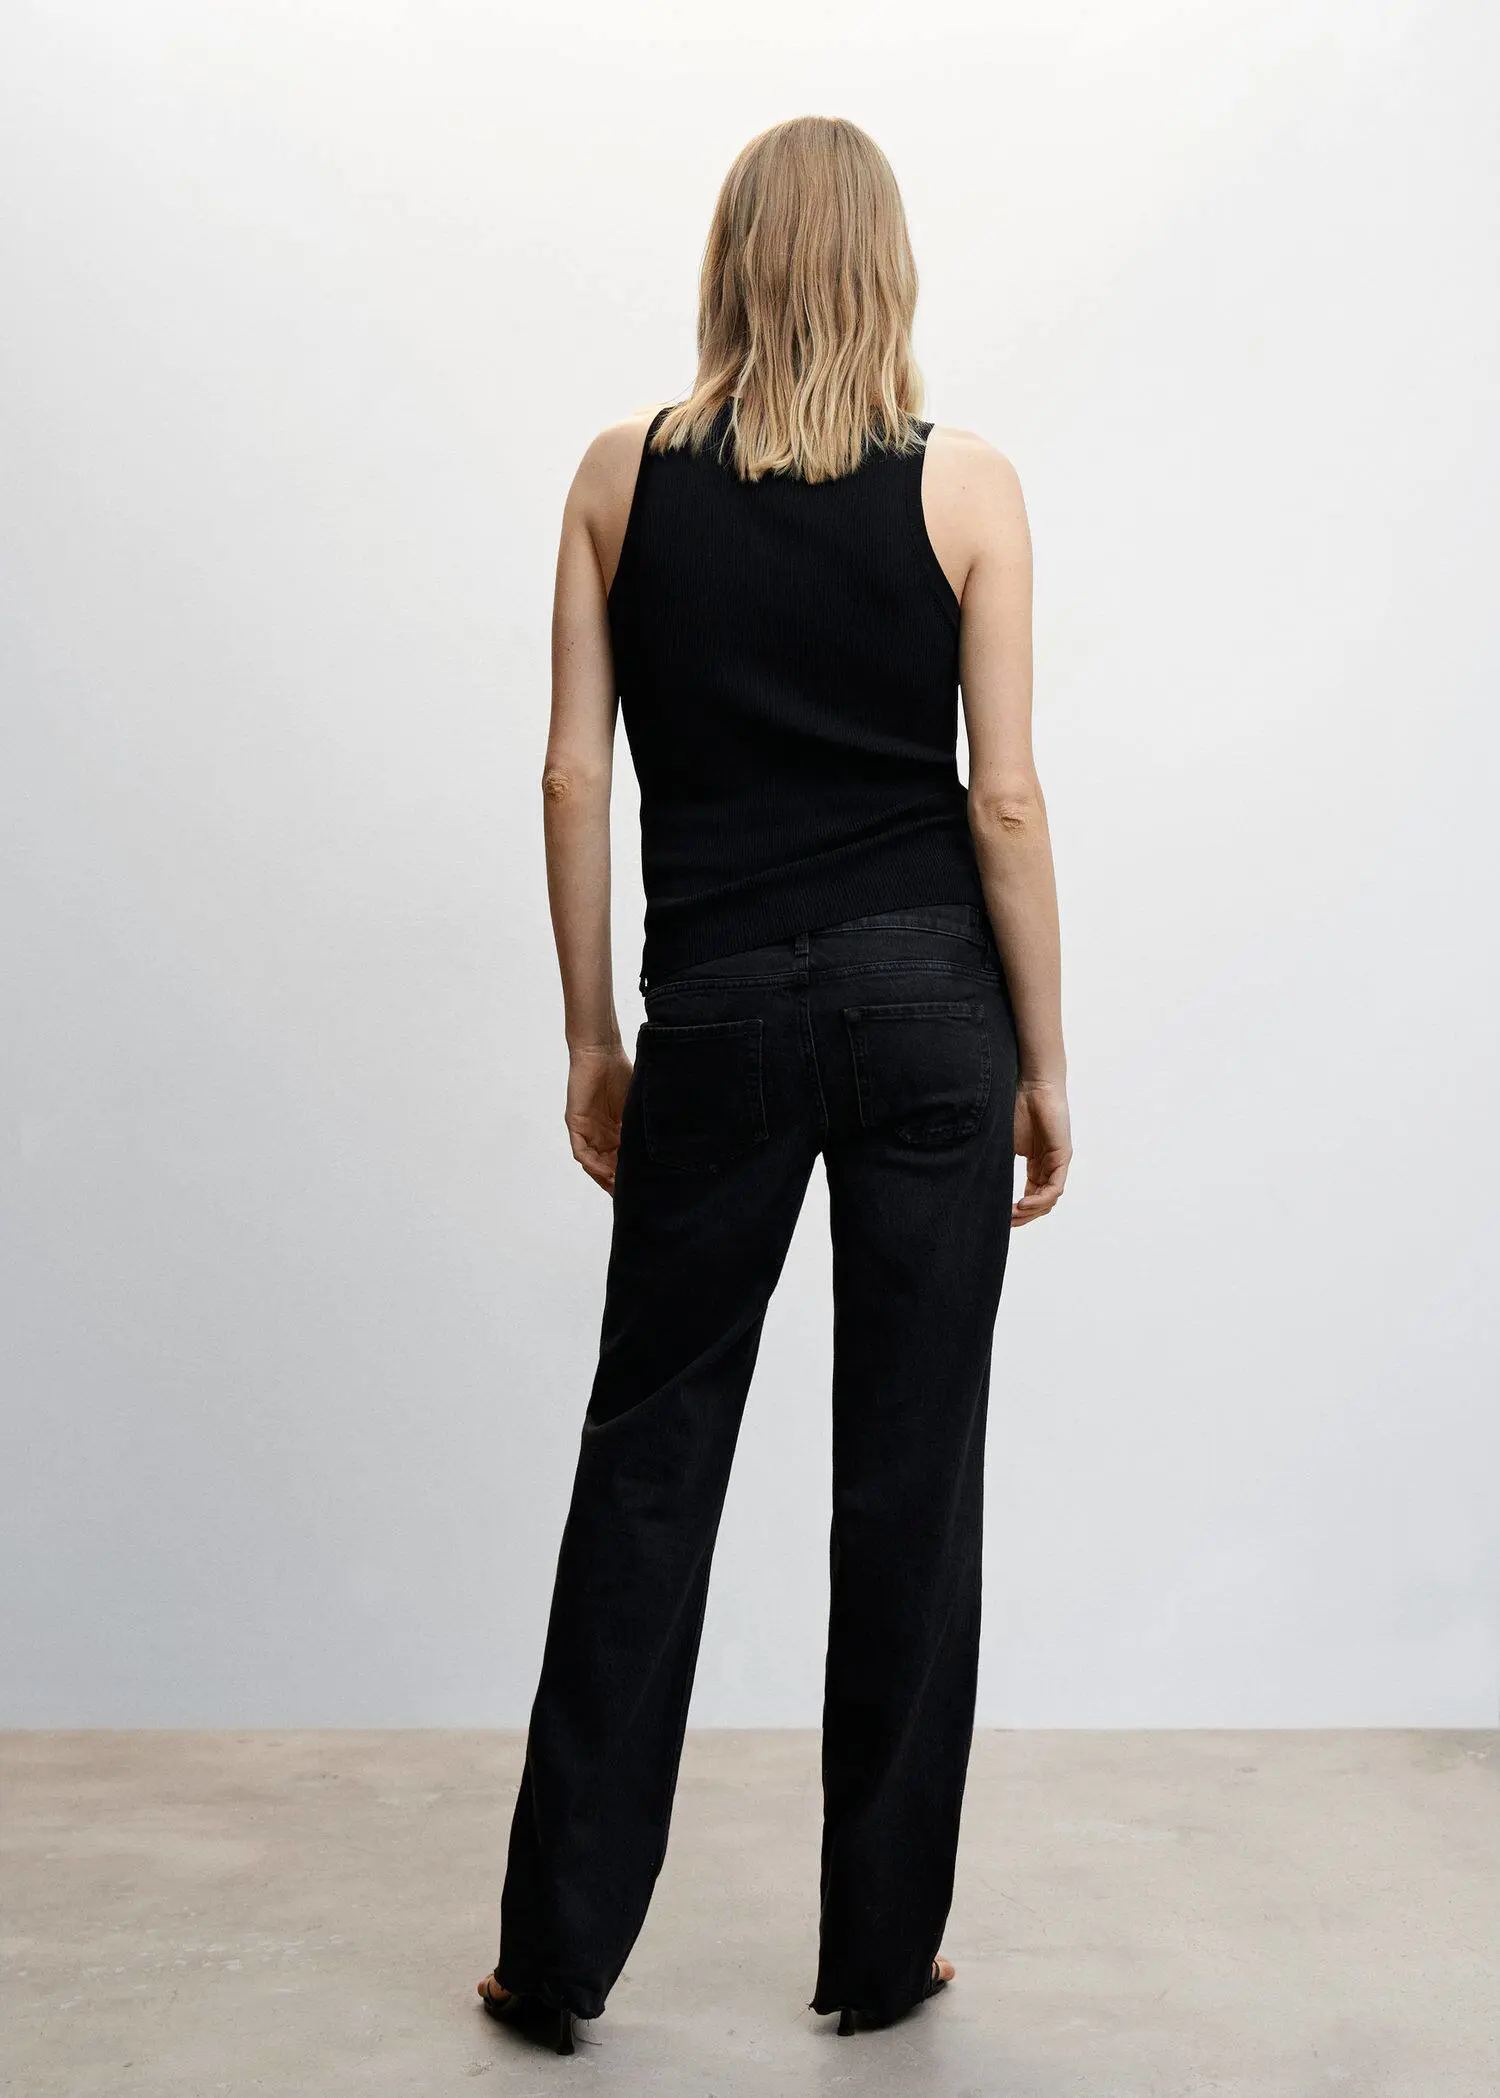 Mango Maternity wideleg jeans. a woman in a black top and black pants. 